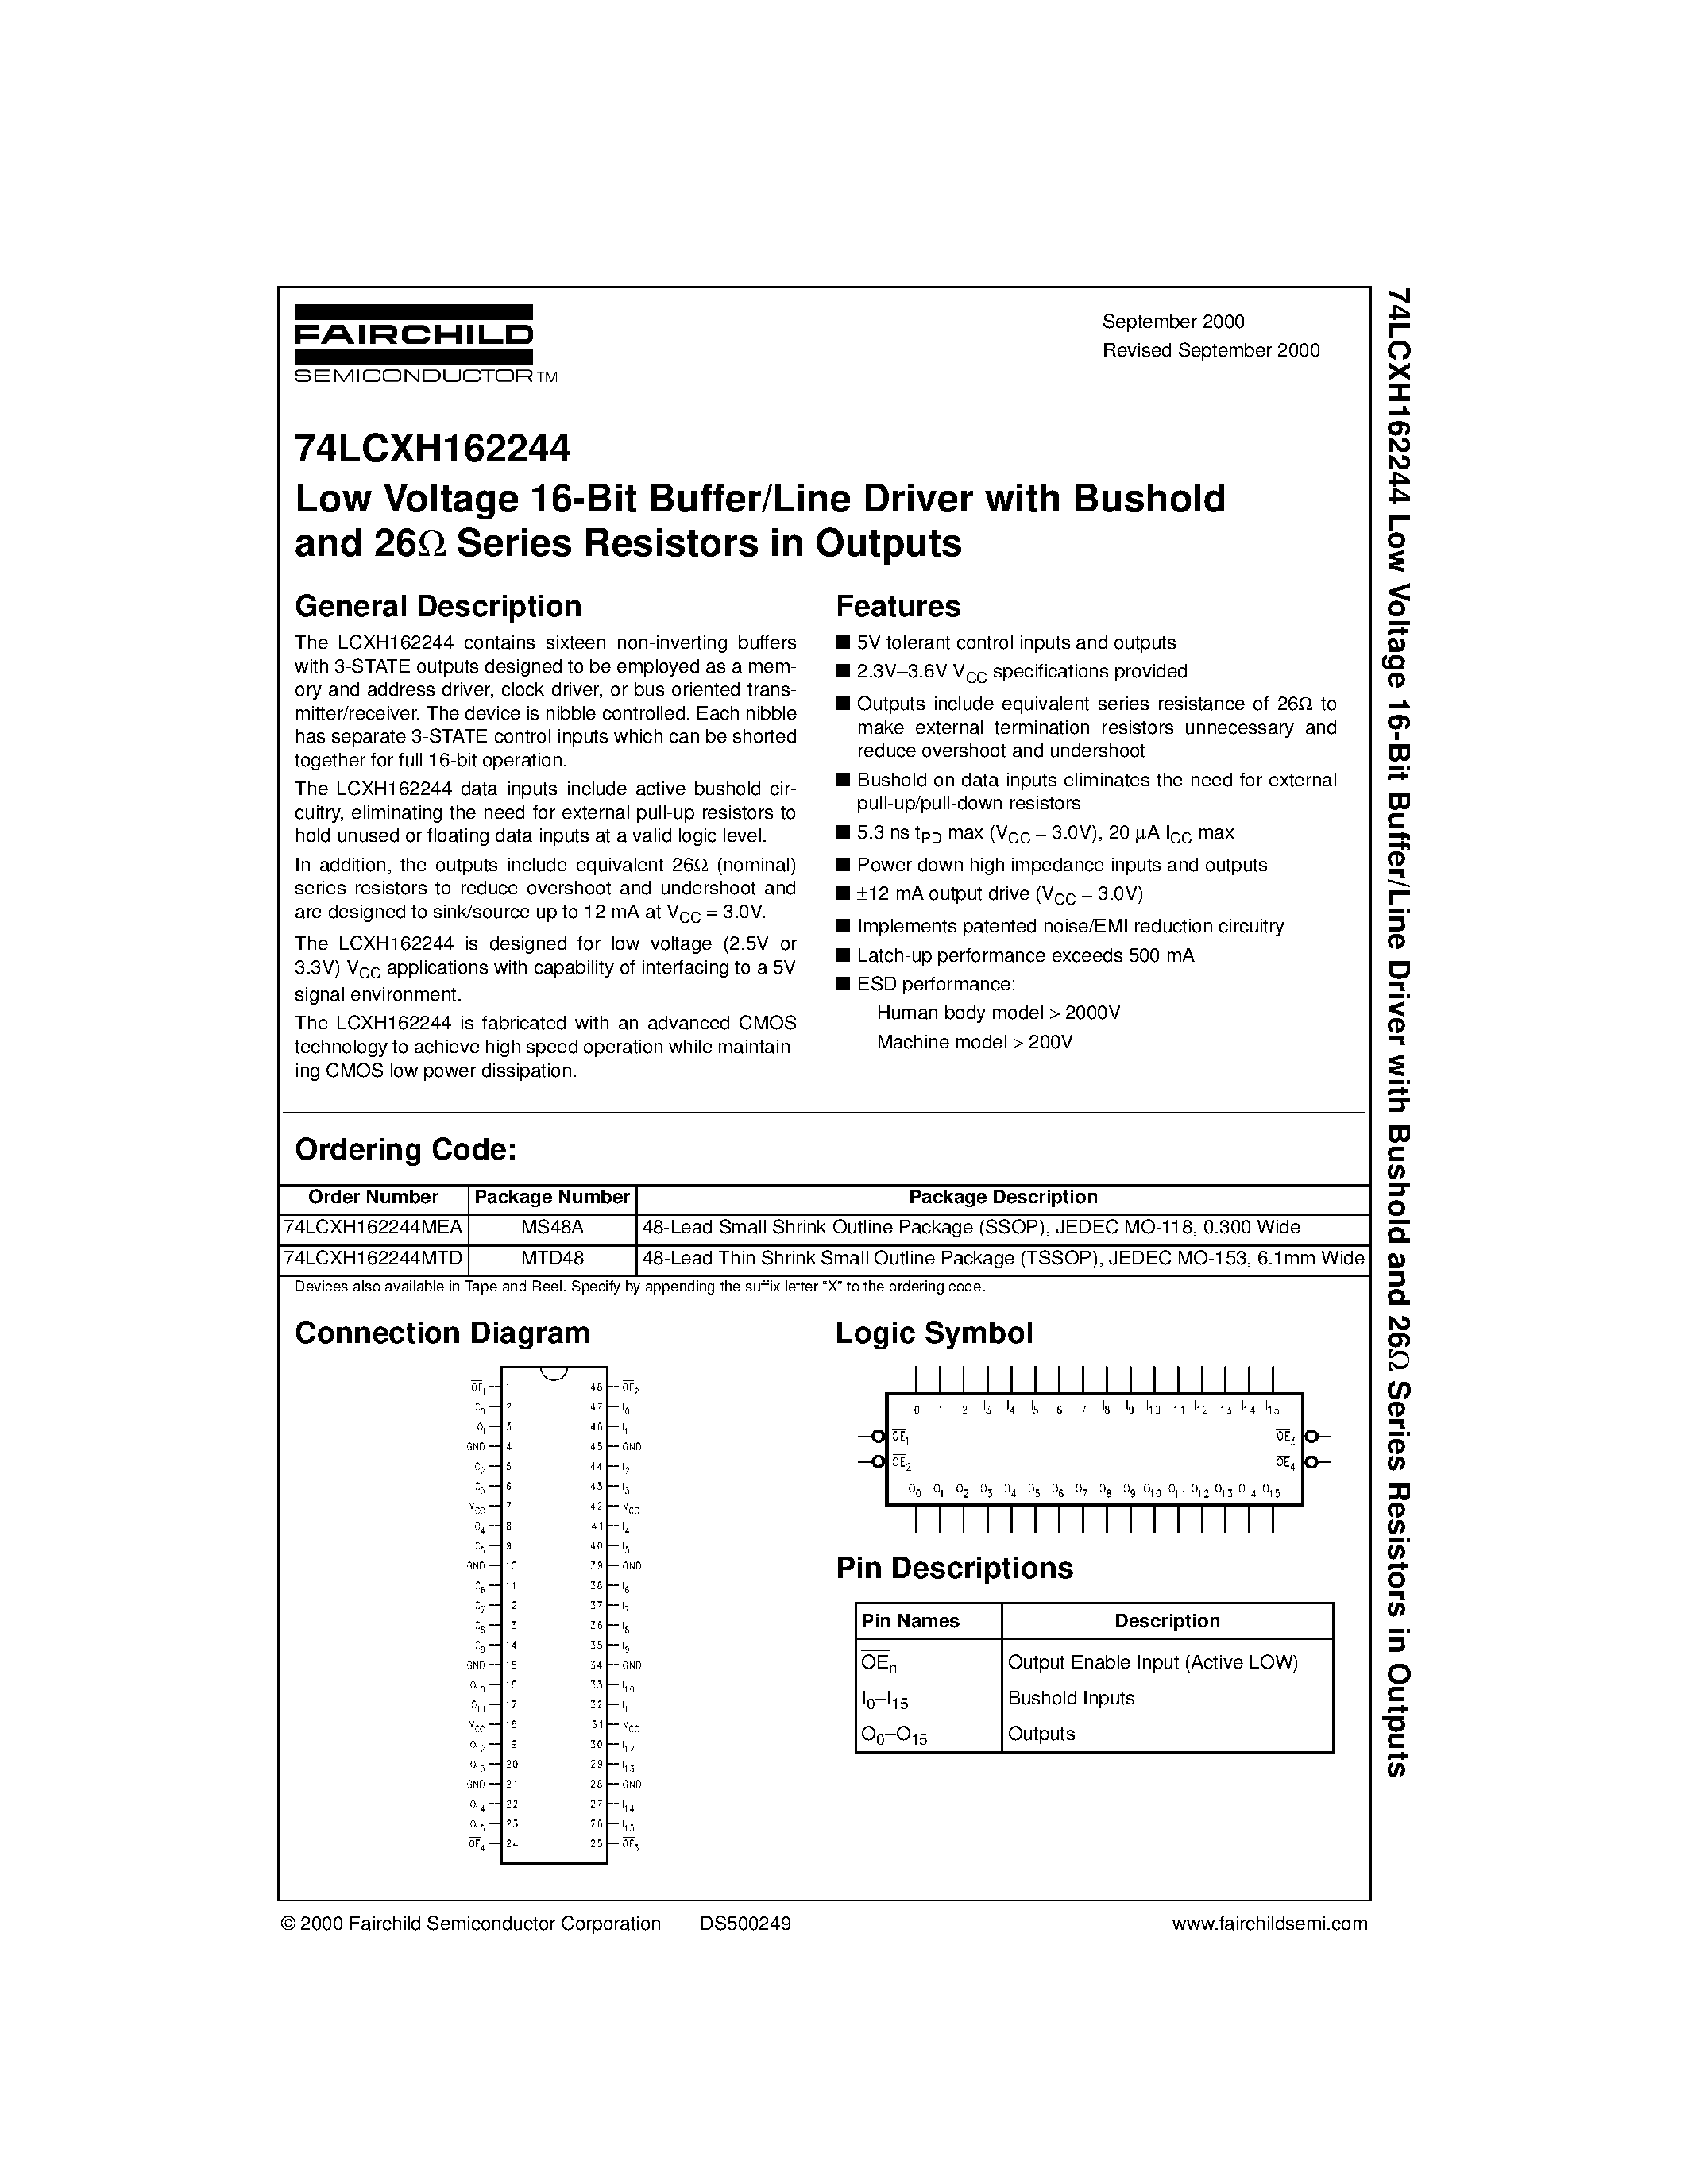 Datasheet 74LCXH162244 - Low Voltage 16-Bit Buffer/Line Driver with Bushold and 26 Series Resistors in Outputs page 1